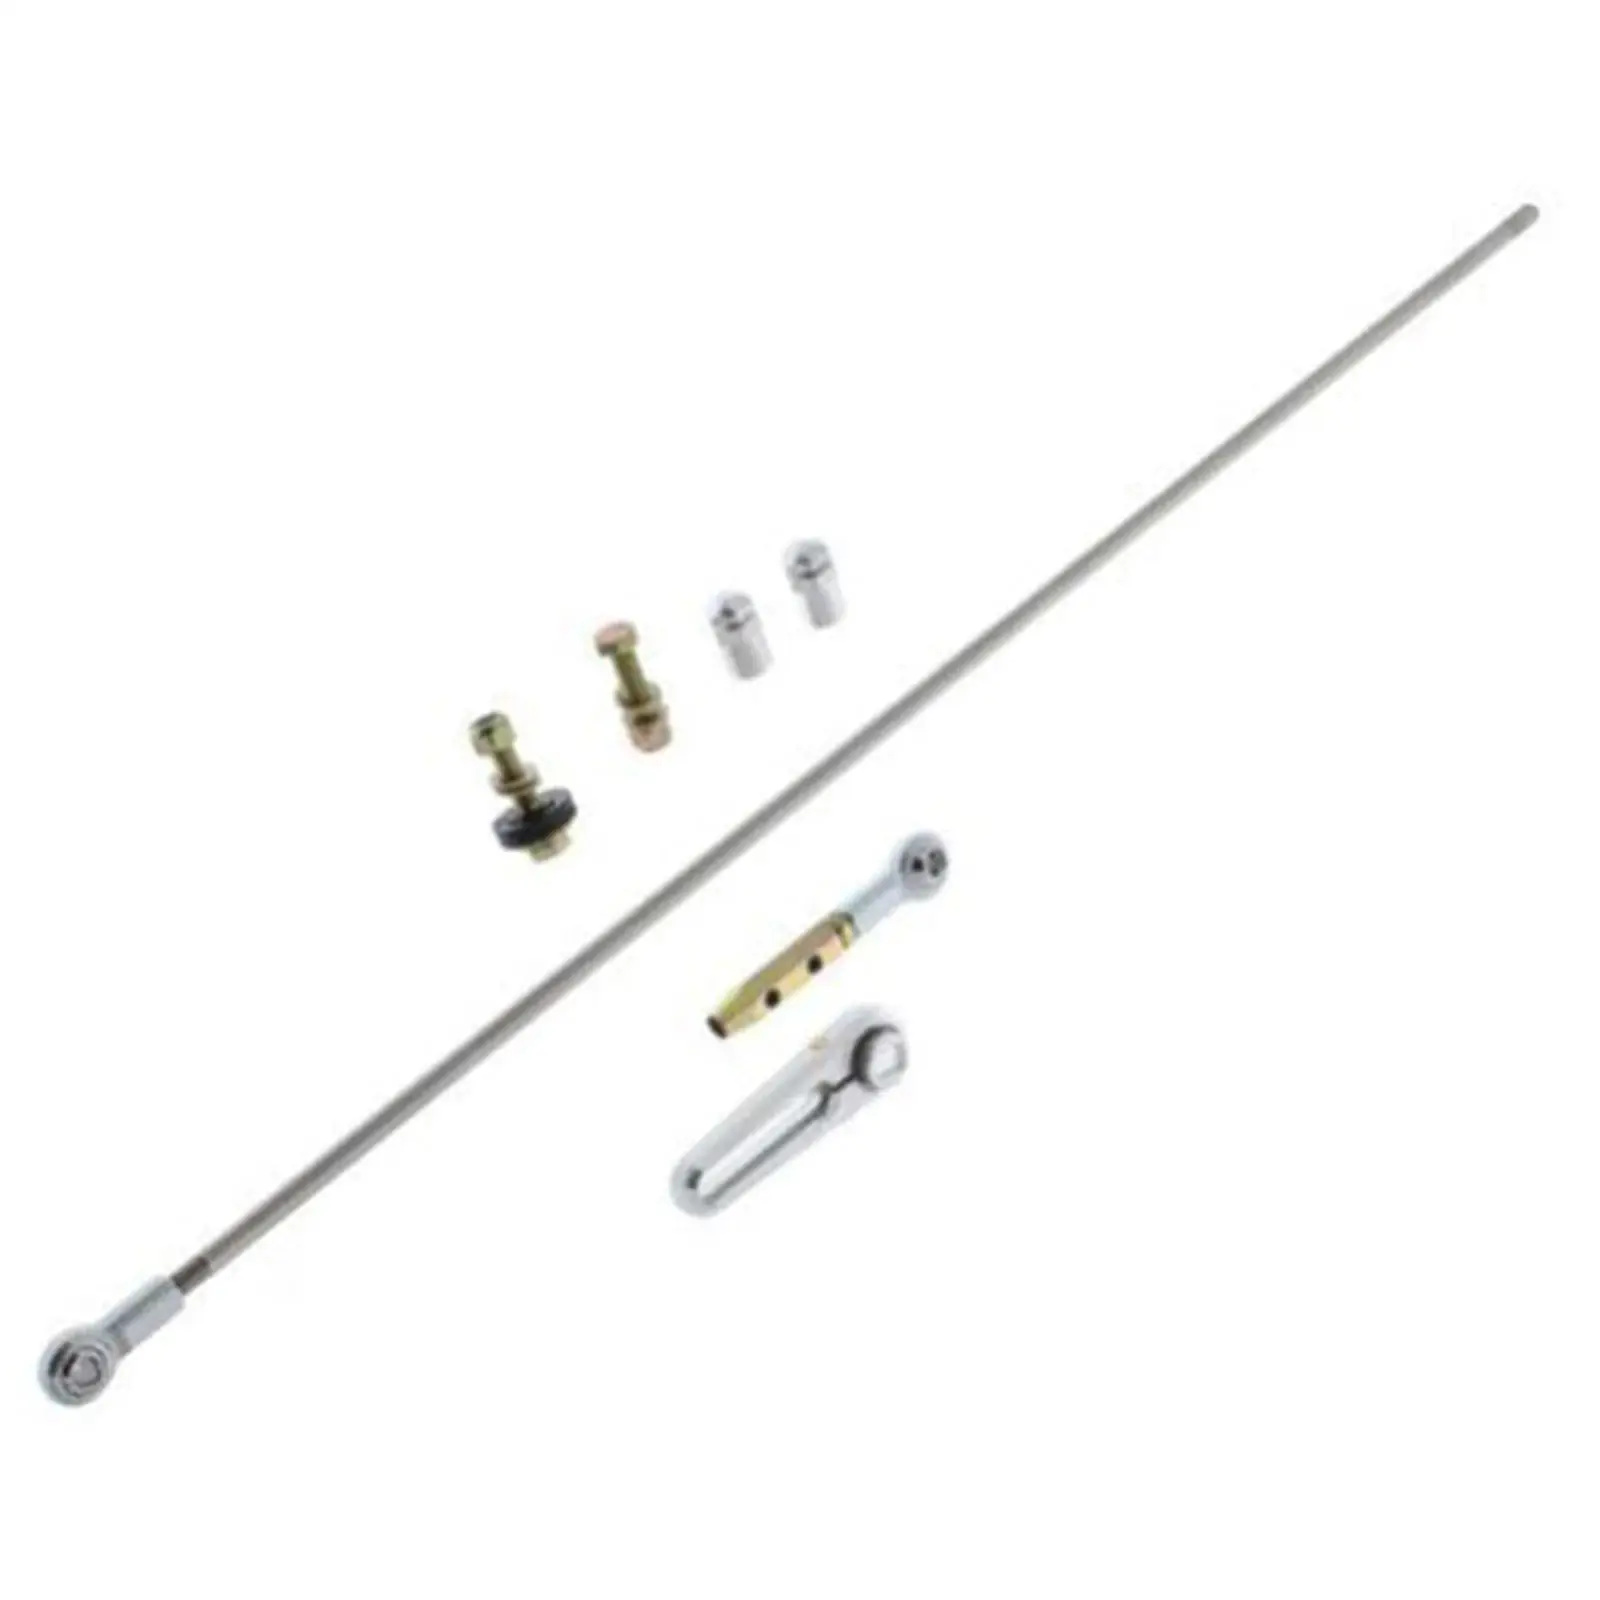 Transmission Shift Linkage Kit Exquisite Workmanship Wear Resistance Easily Install Replacement Aca-1811 for GM 700R4 4L60